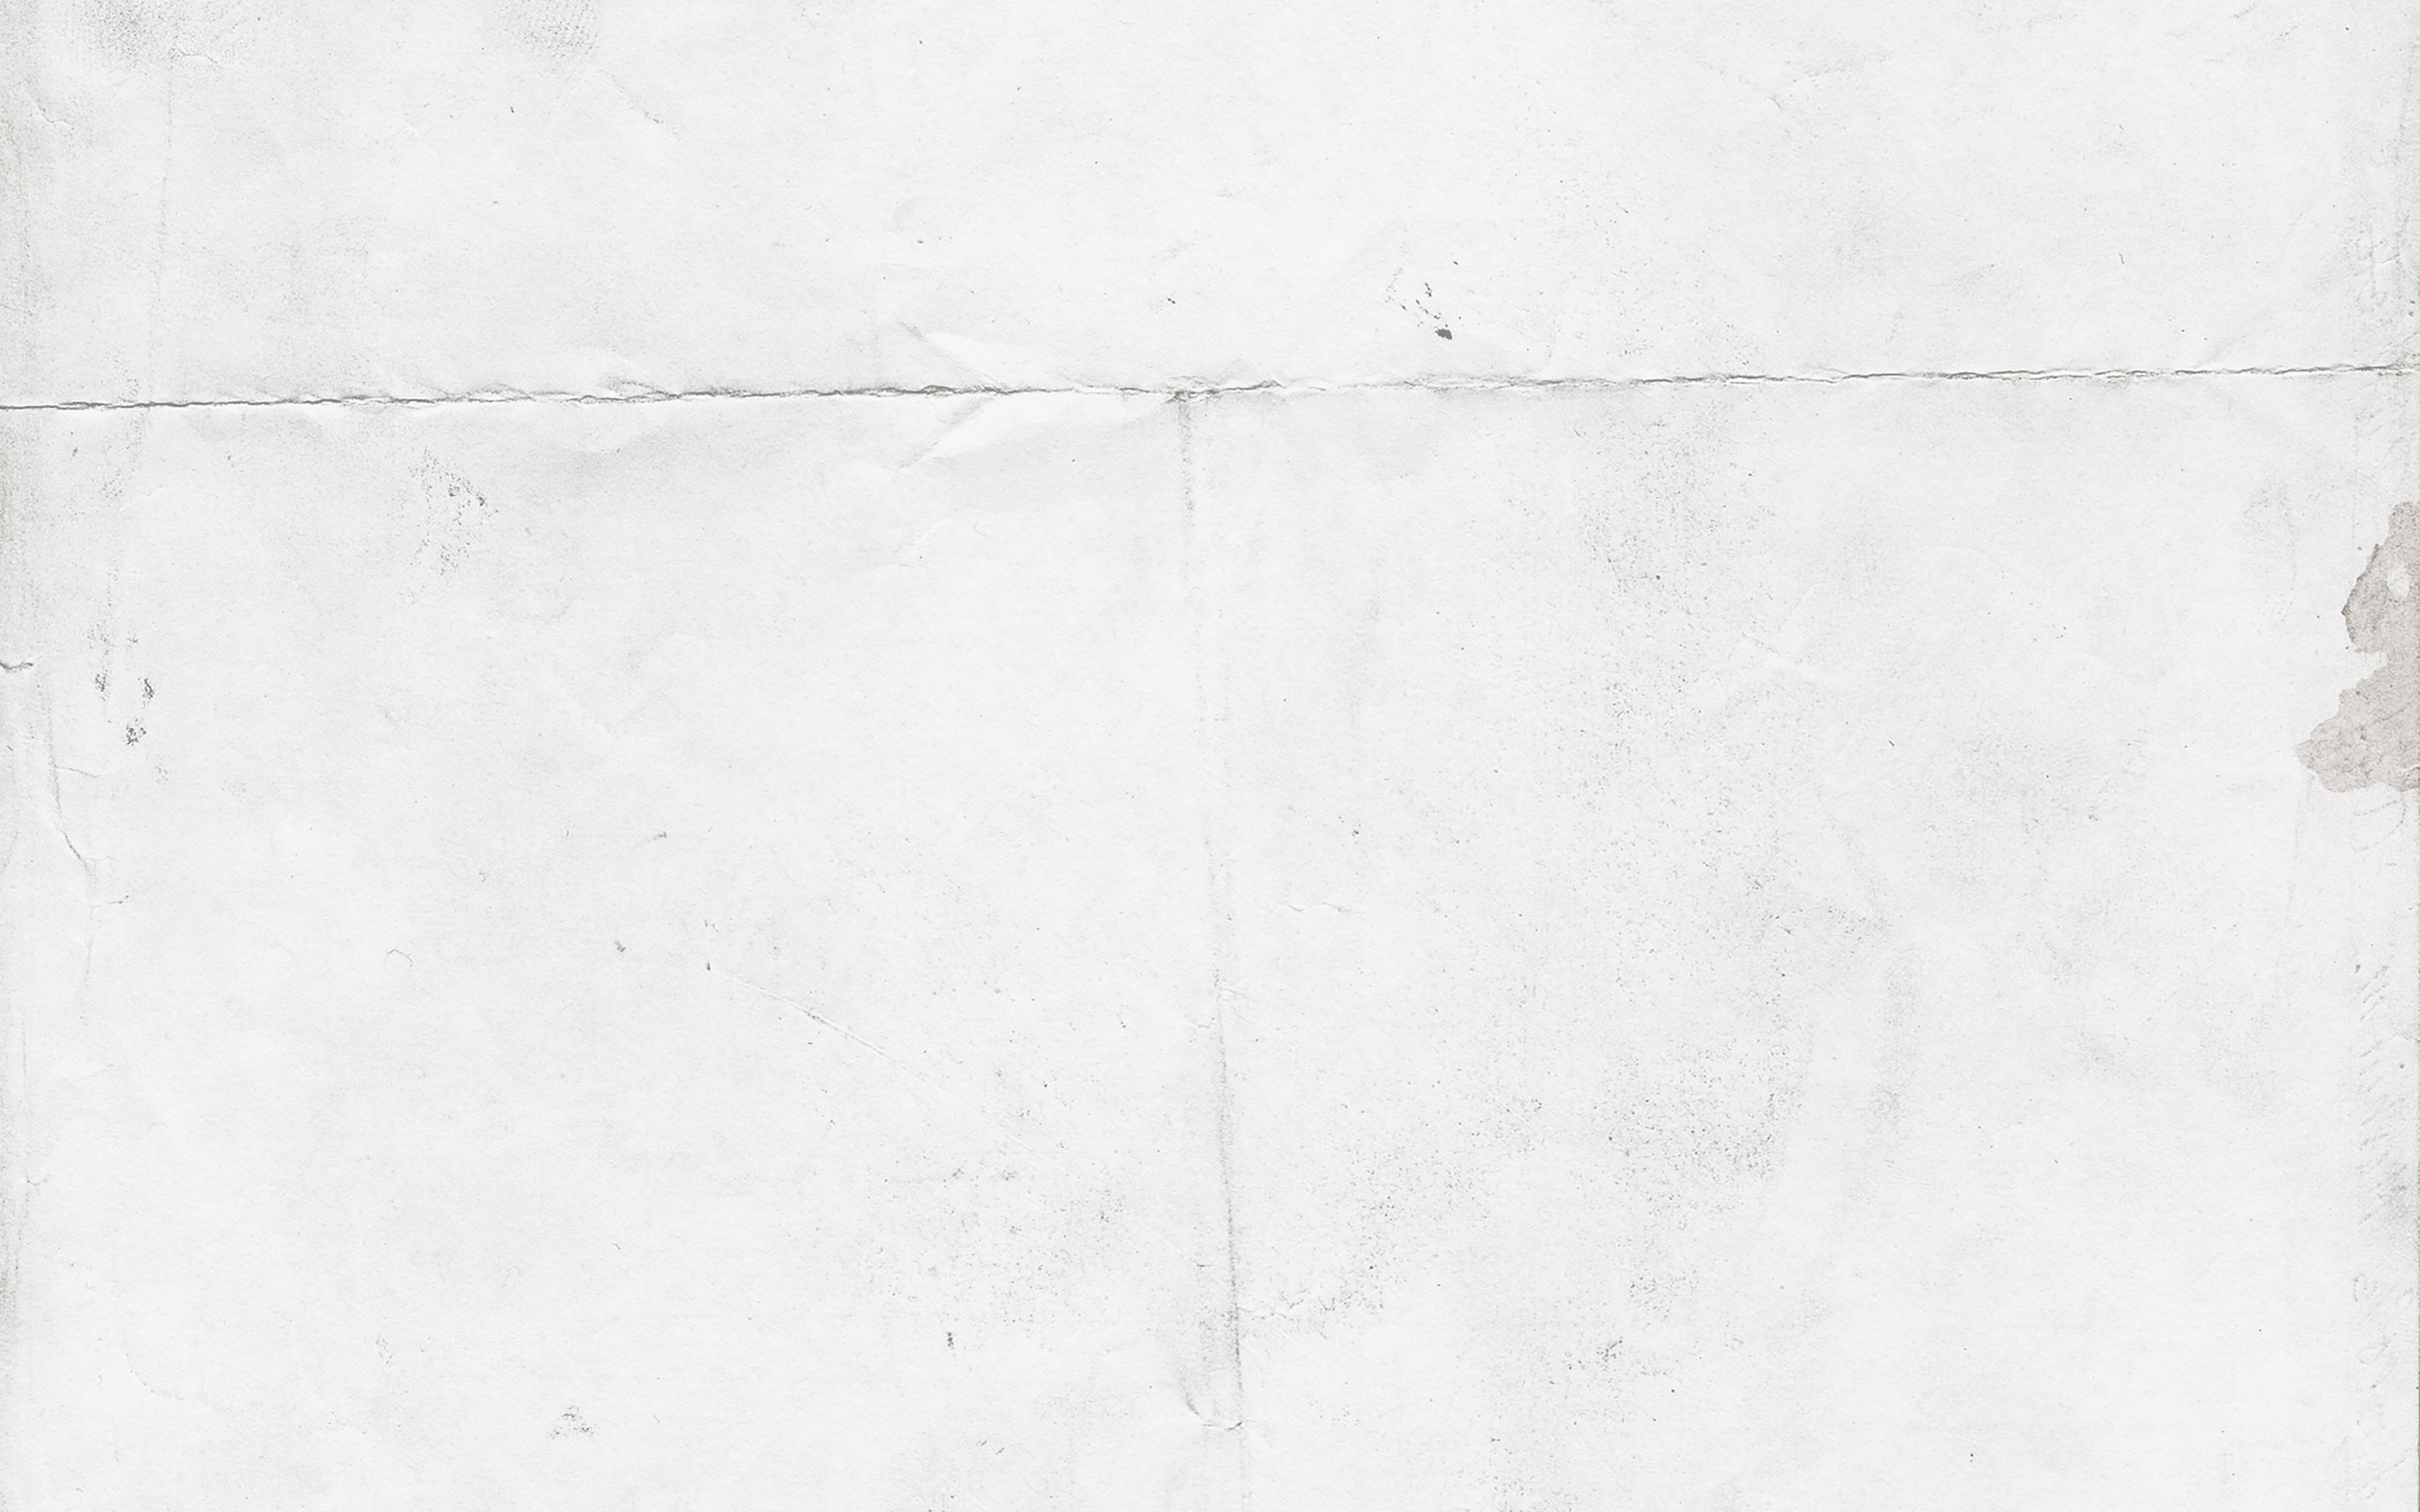 I Love Papers | ab57-wallpaper-grunge-paper-texture-white